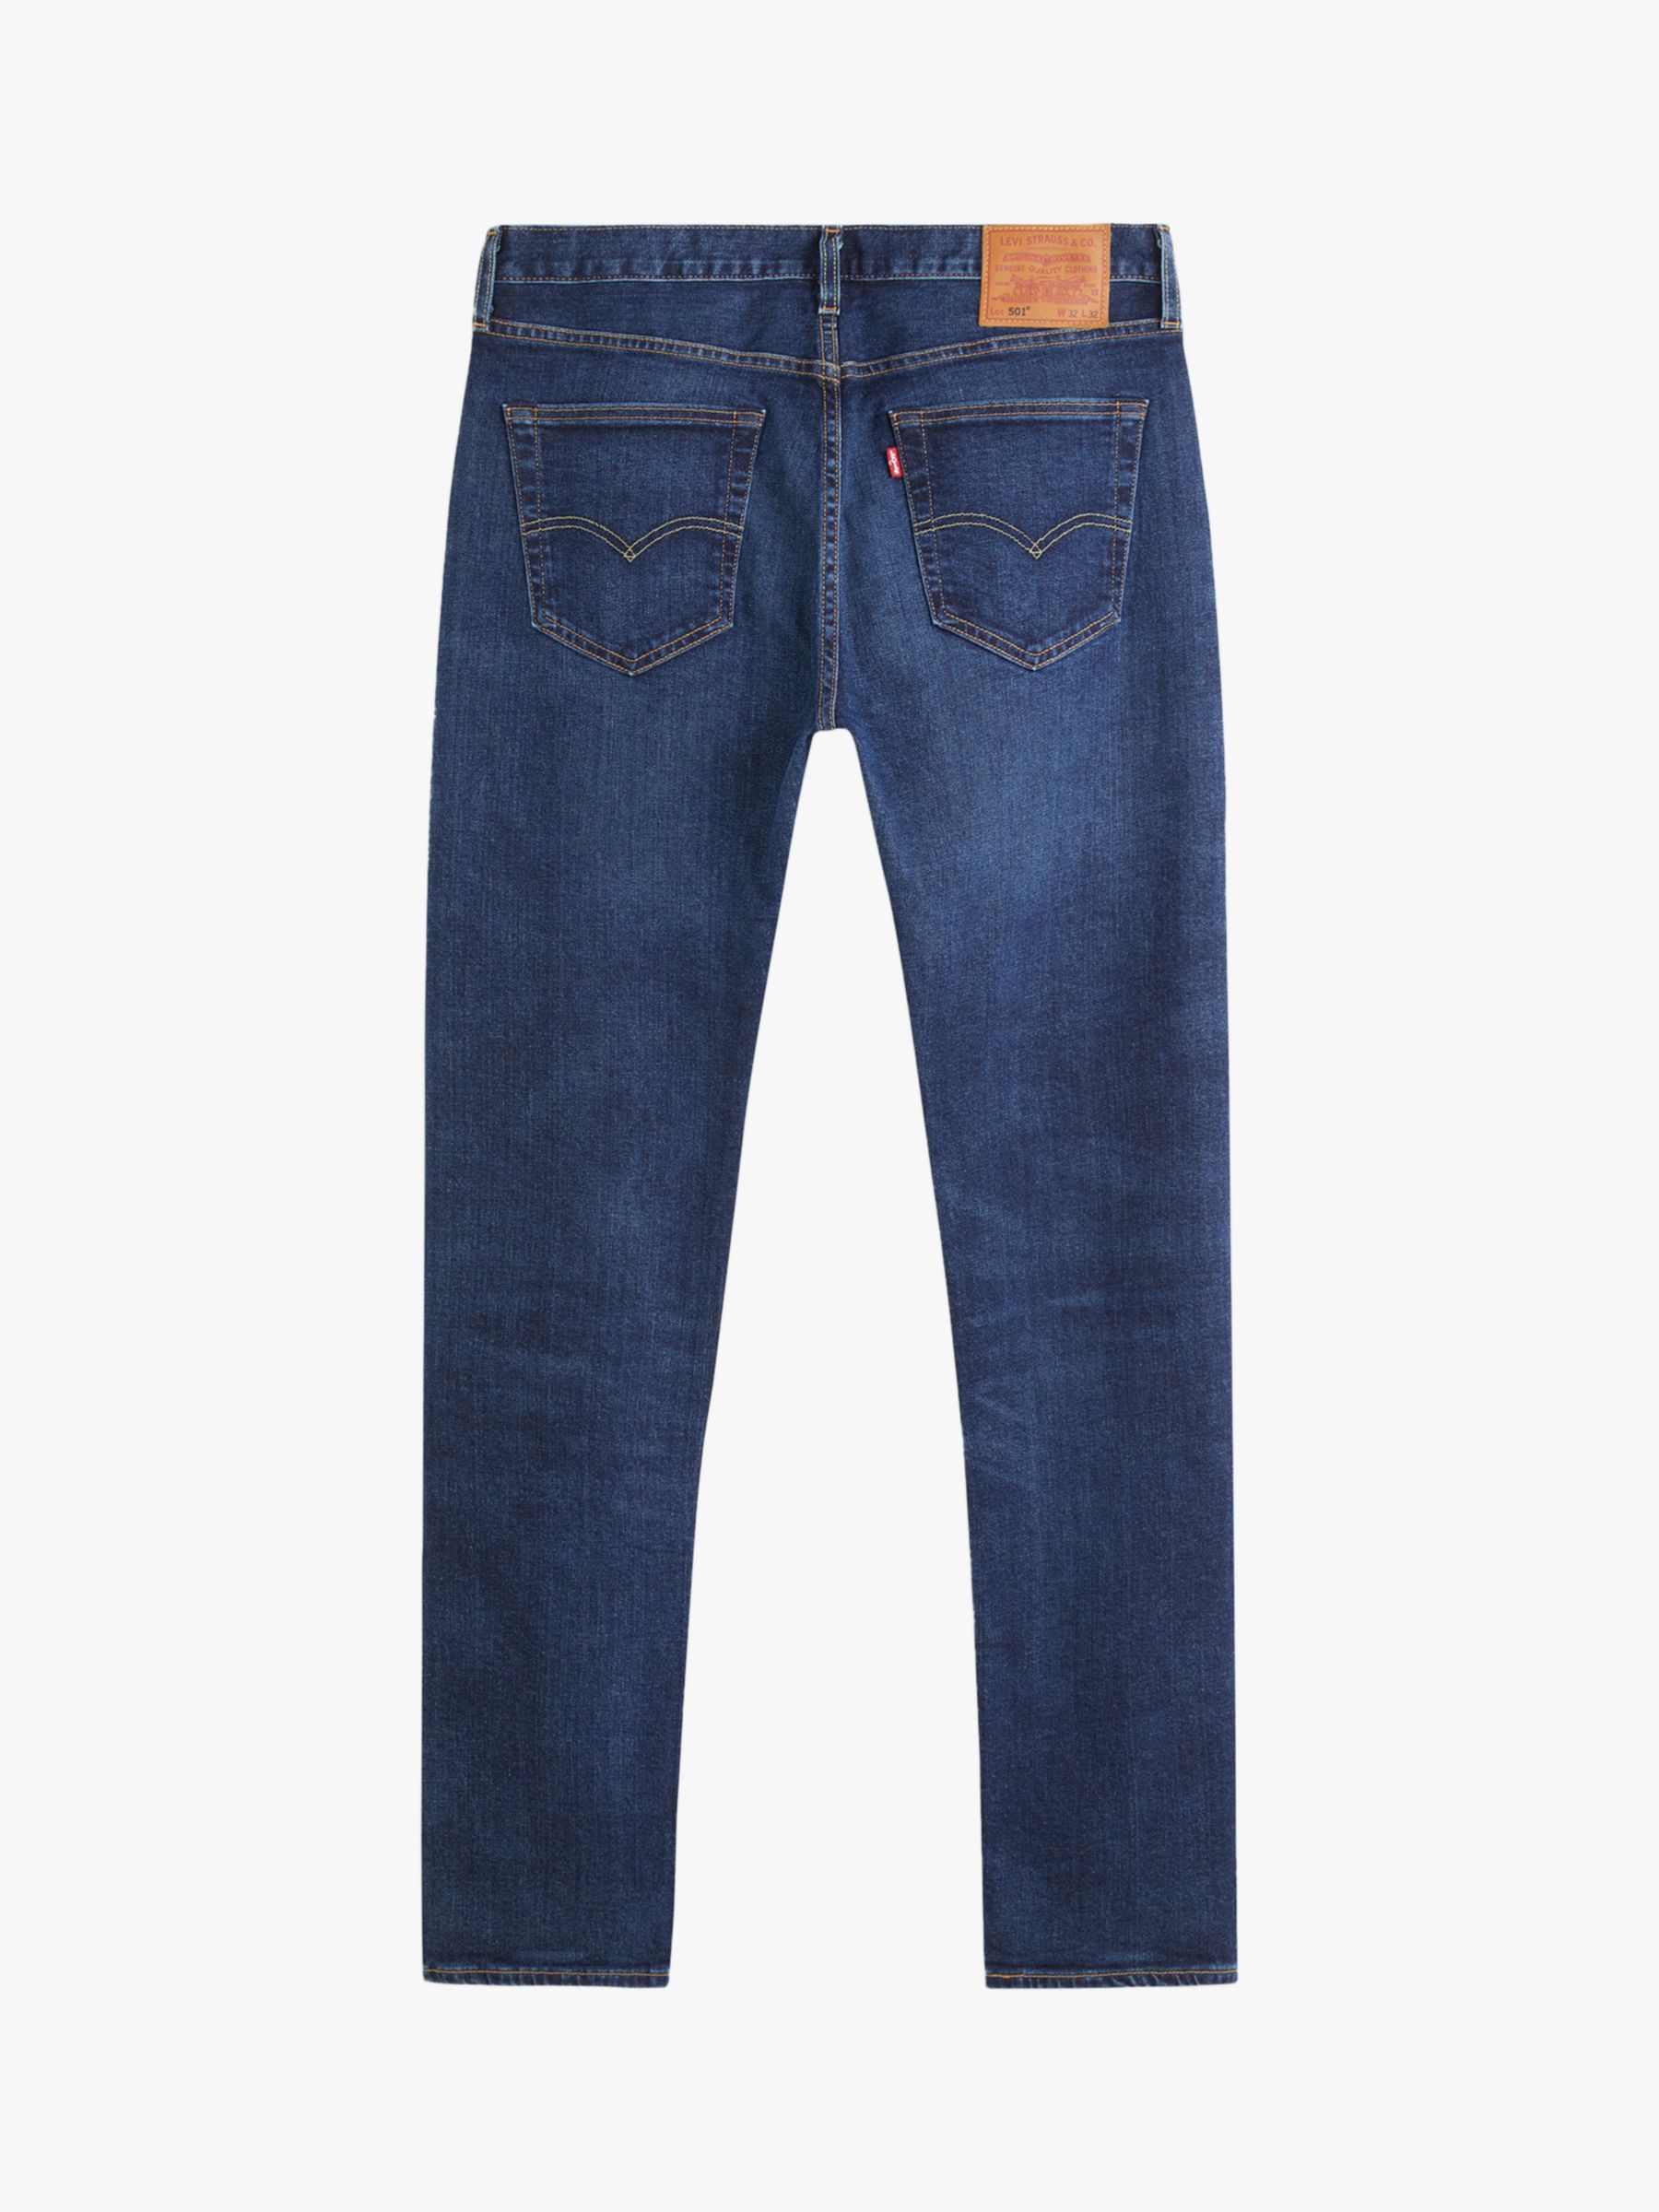 Levi's 501 Original Straight Jeans, Do The Rump at John Lewis & Partners